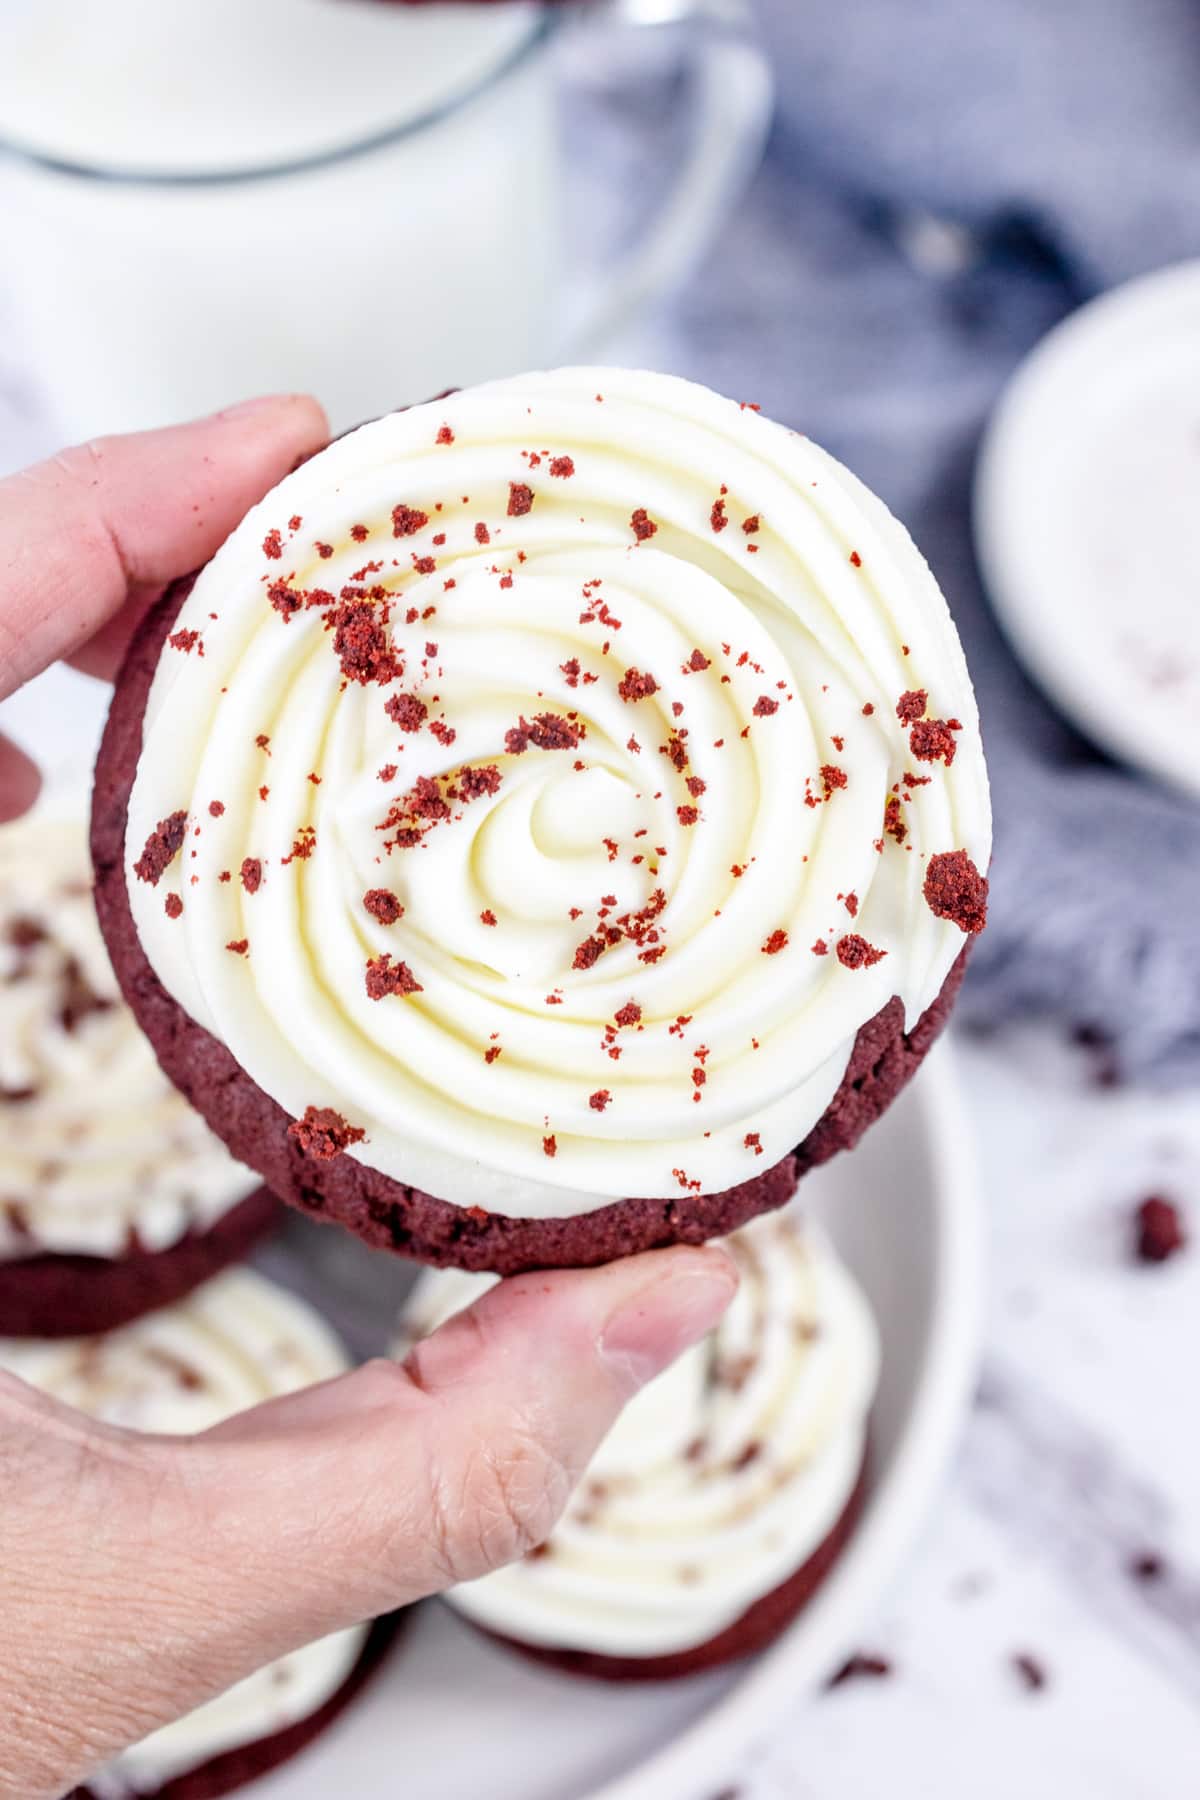 Top view of a Red Velvet Cookies with Cream Cheese Frosting being held in mid air by a hand.